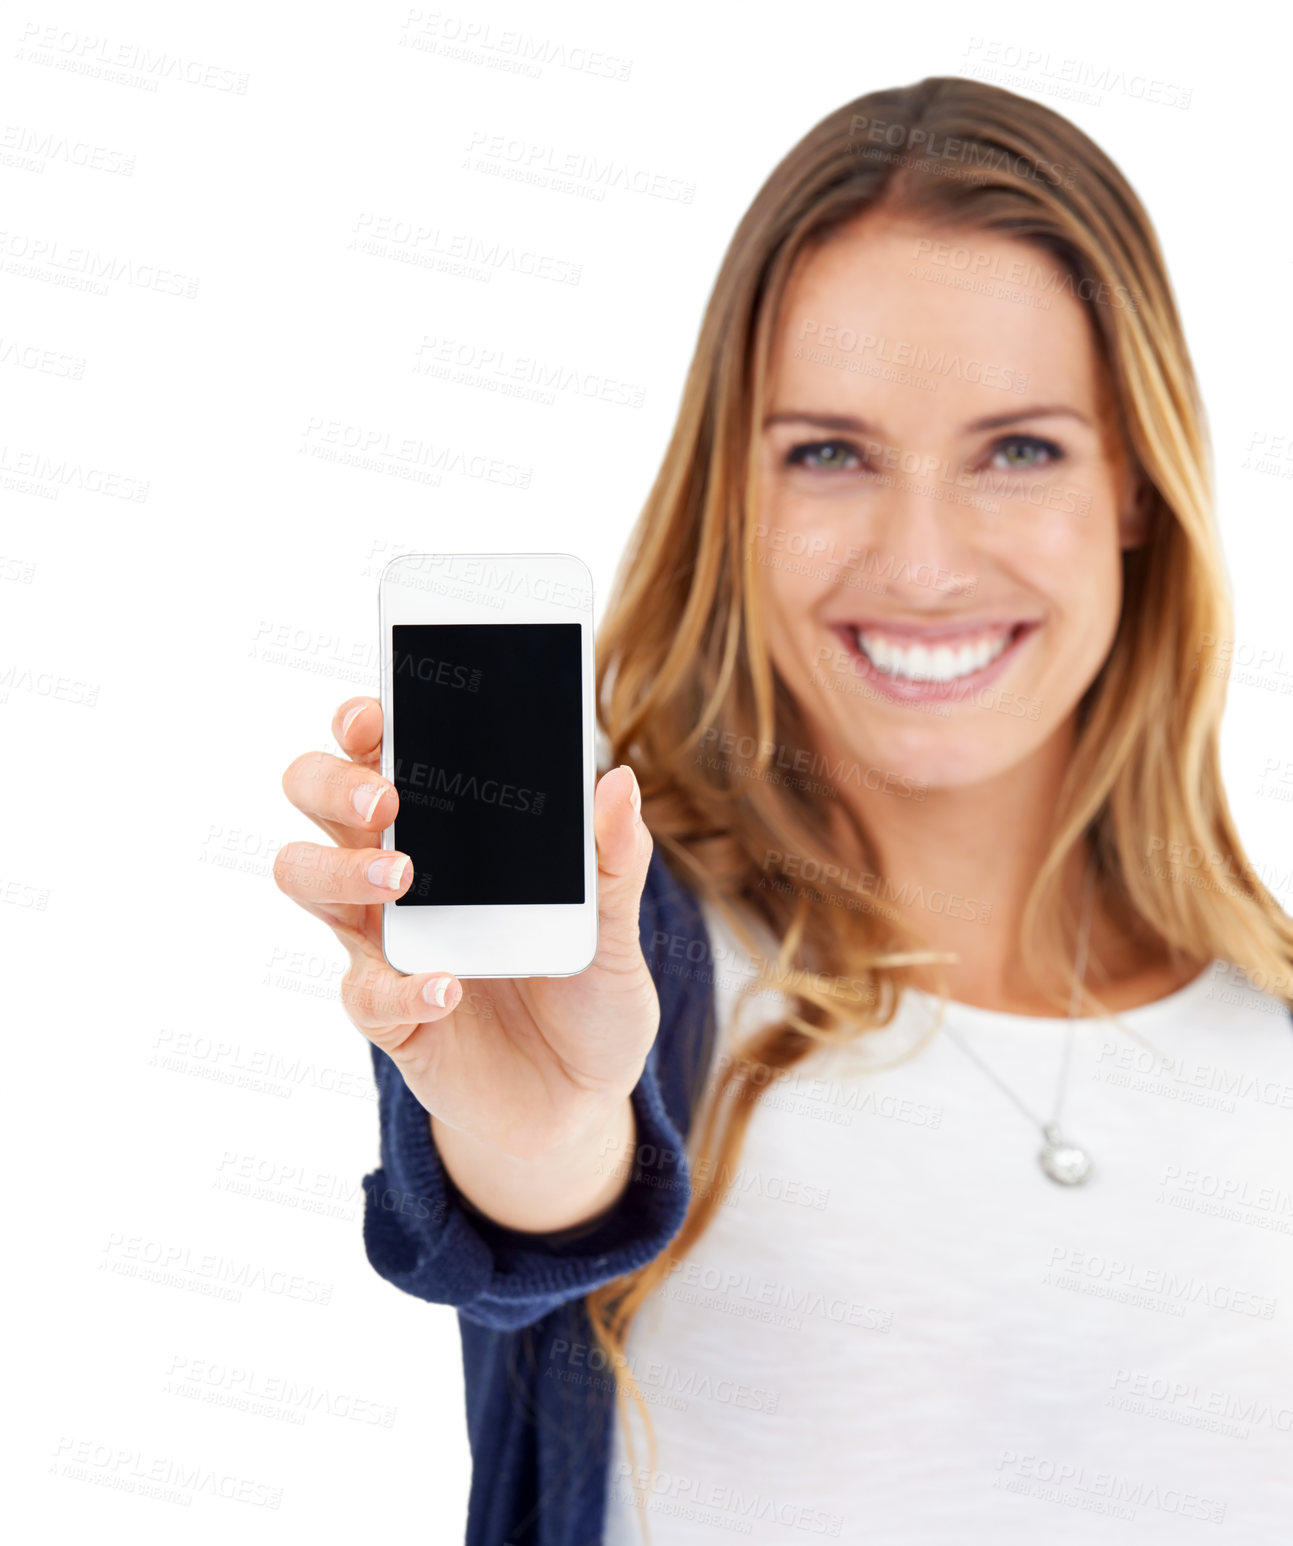 Buy stock photo Showing phone screen, happy and portrait of a woman isolated on a white background in a studio. Smile, promotion and a young lady with a mobile in hand for connectivity, communication and branding